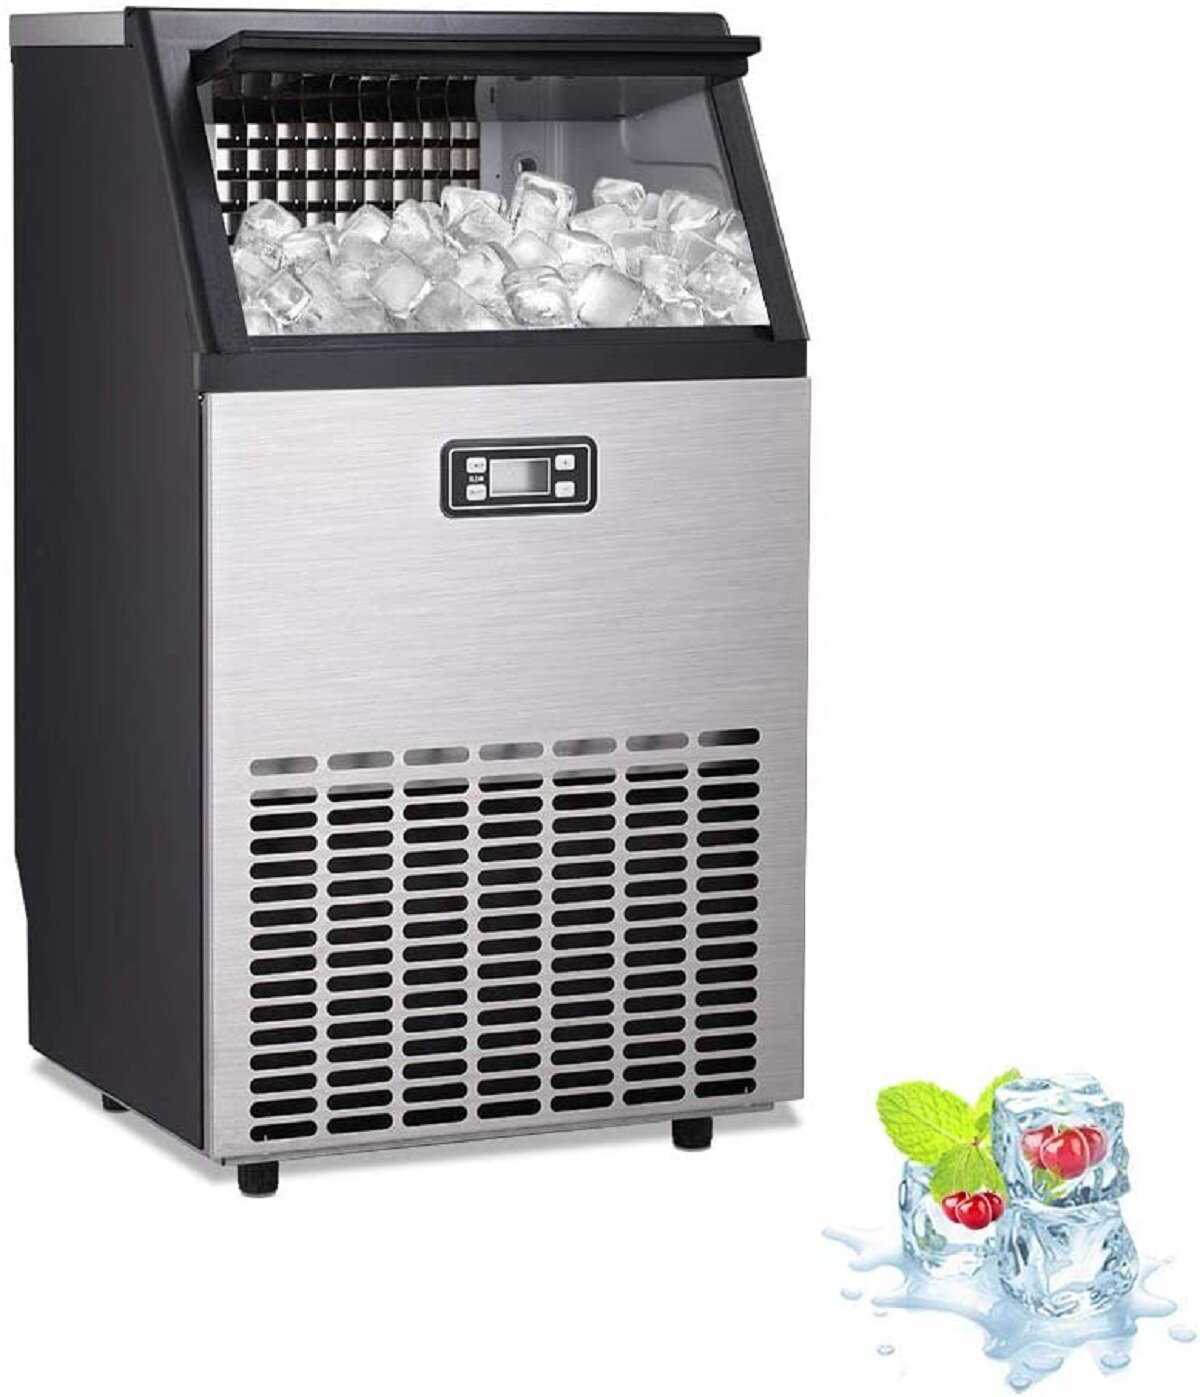 KELIVOL 100 Lb. Daily Production Cube Clear Ice Freestanding Ice Maker